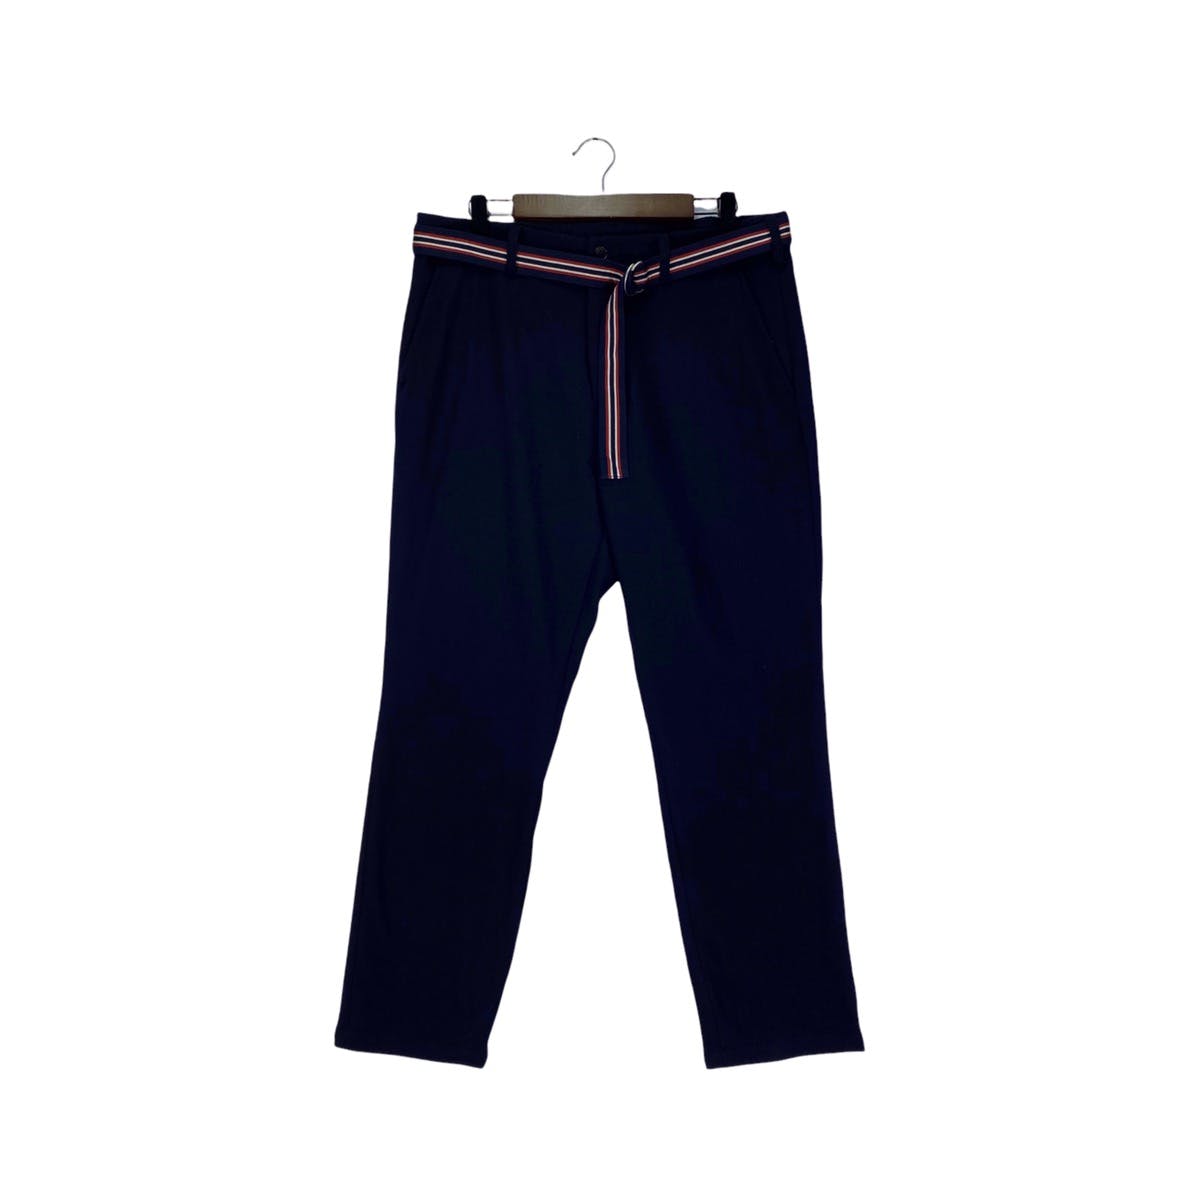 Fred Perry Navy Blue Trouser - 1